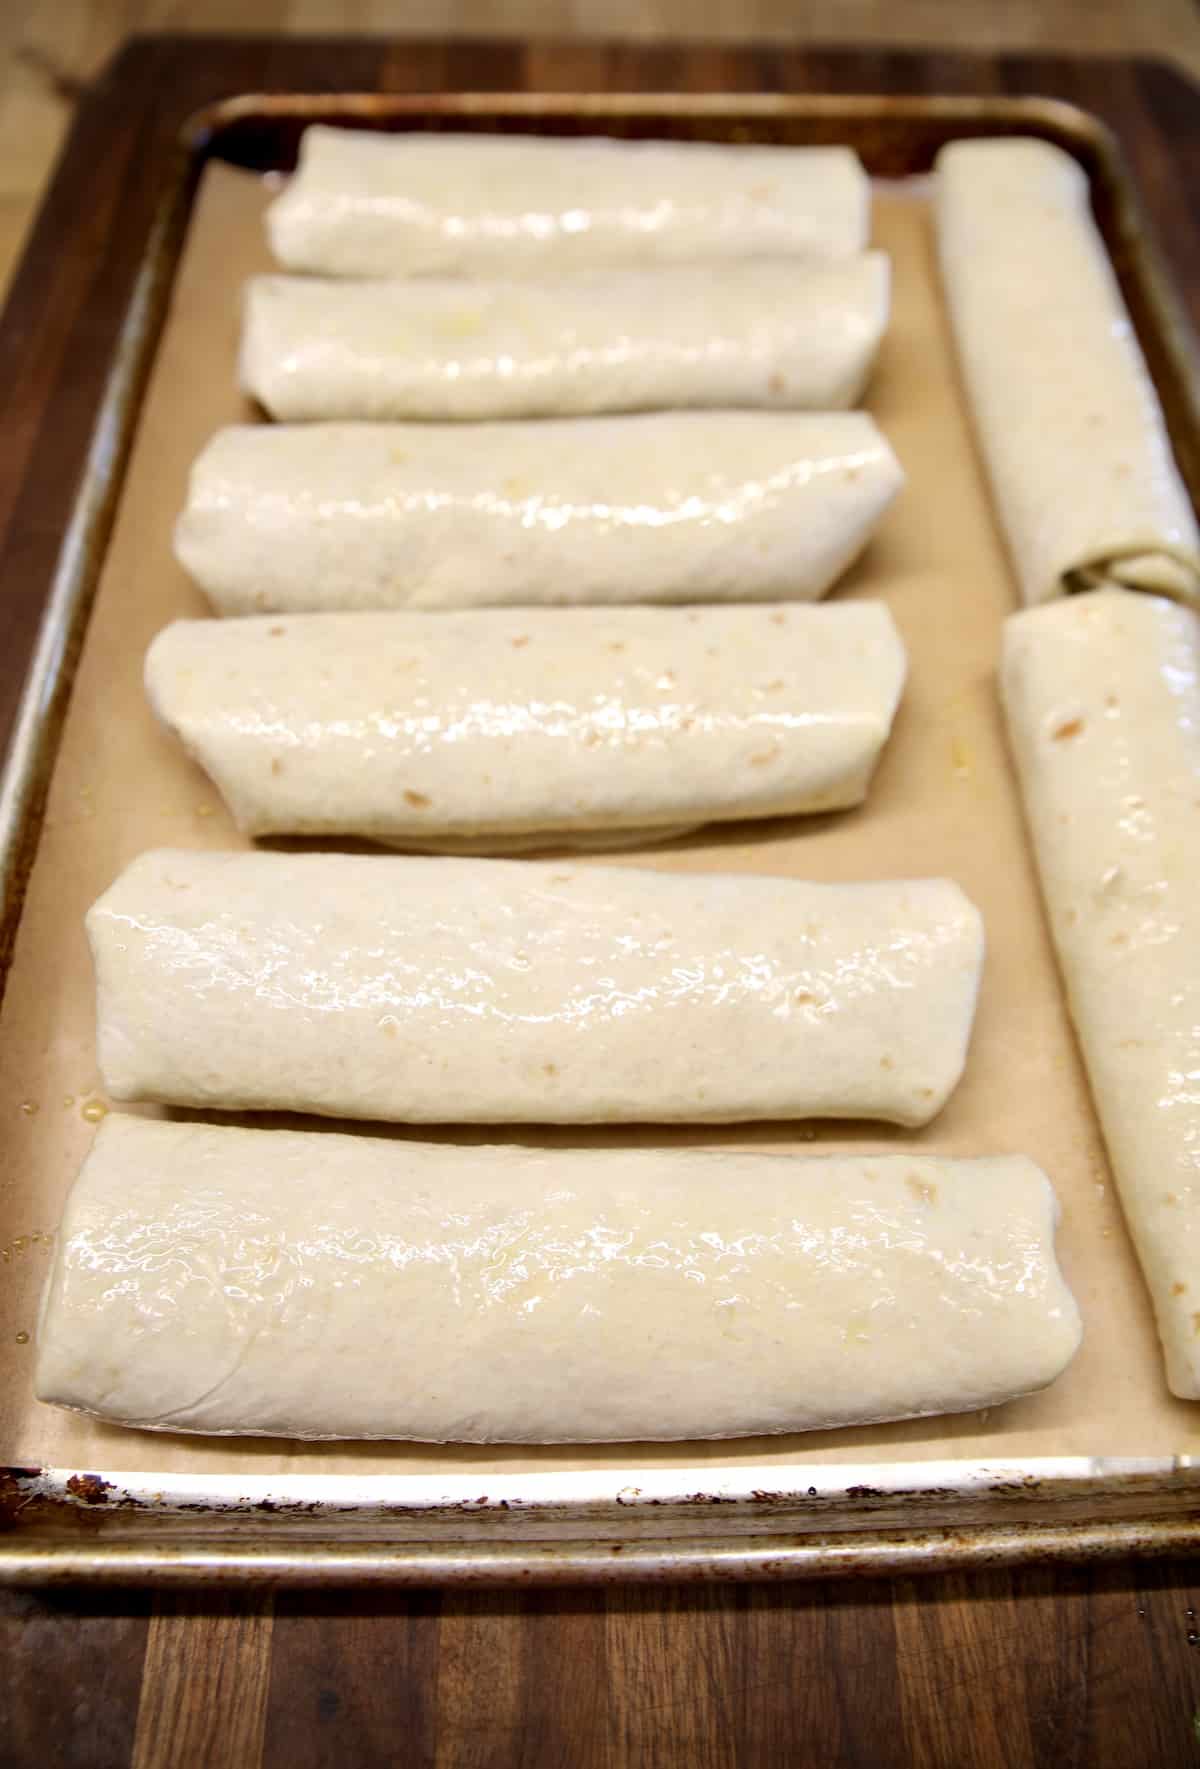 Sheet pan of burritos brushed with olive oil.